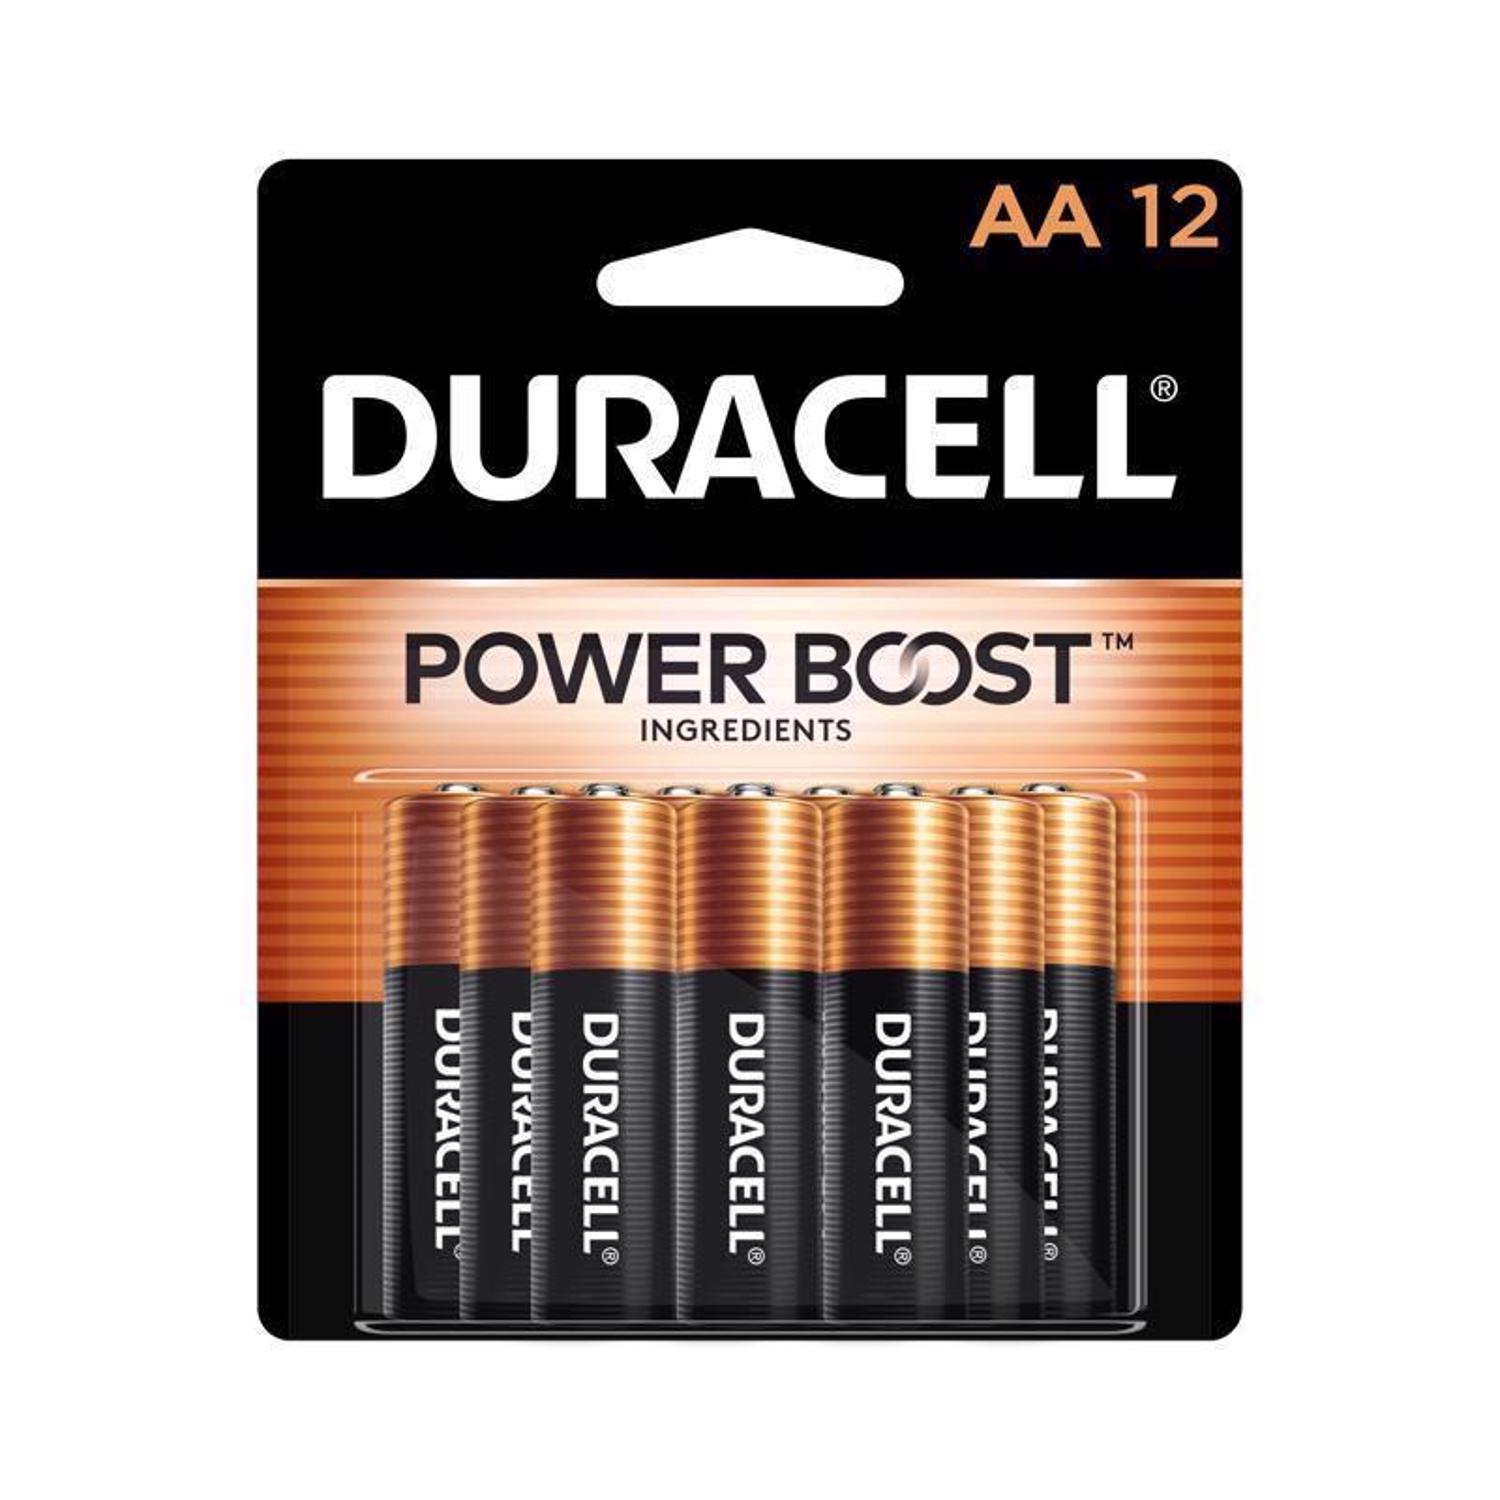 Photos - Household Switch Duracell Coppertop AA Alkaline Batteries 12 pk Carded 04343 